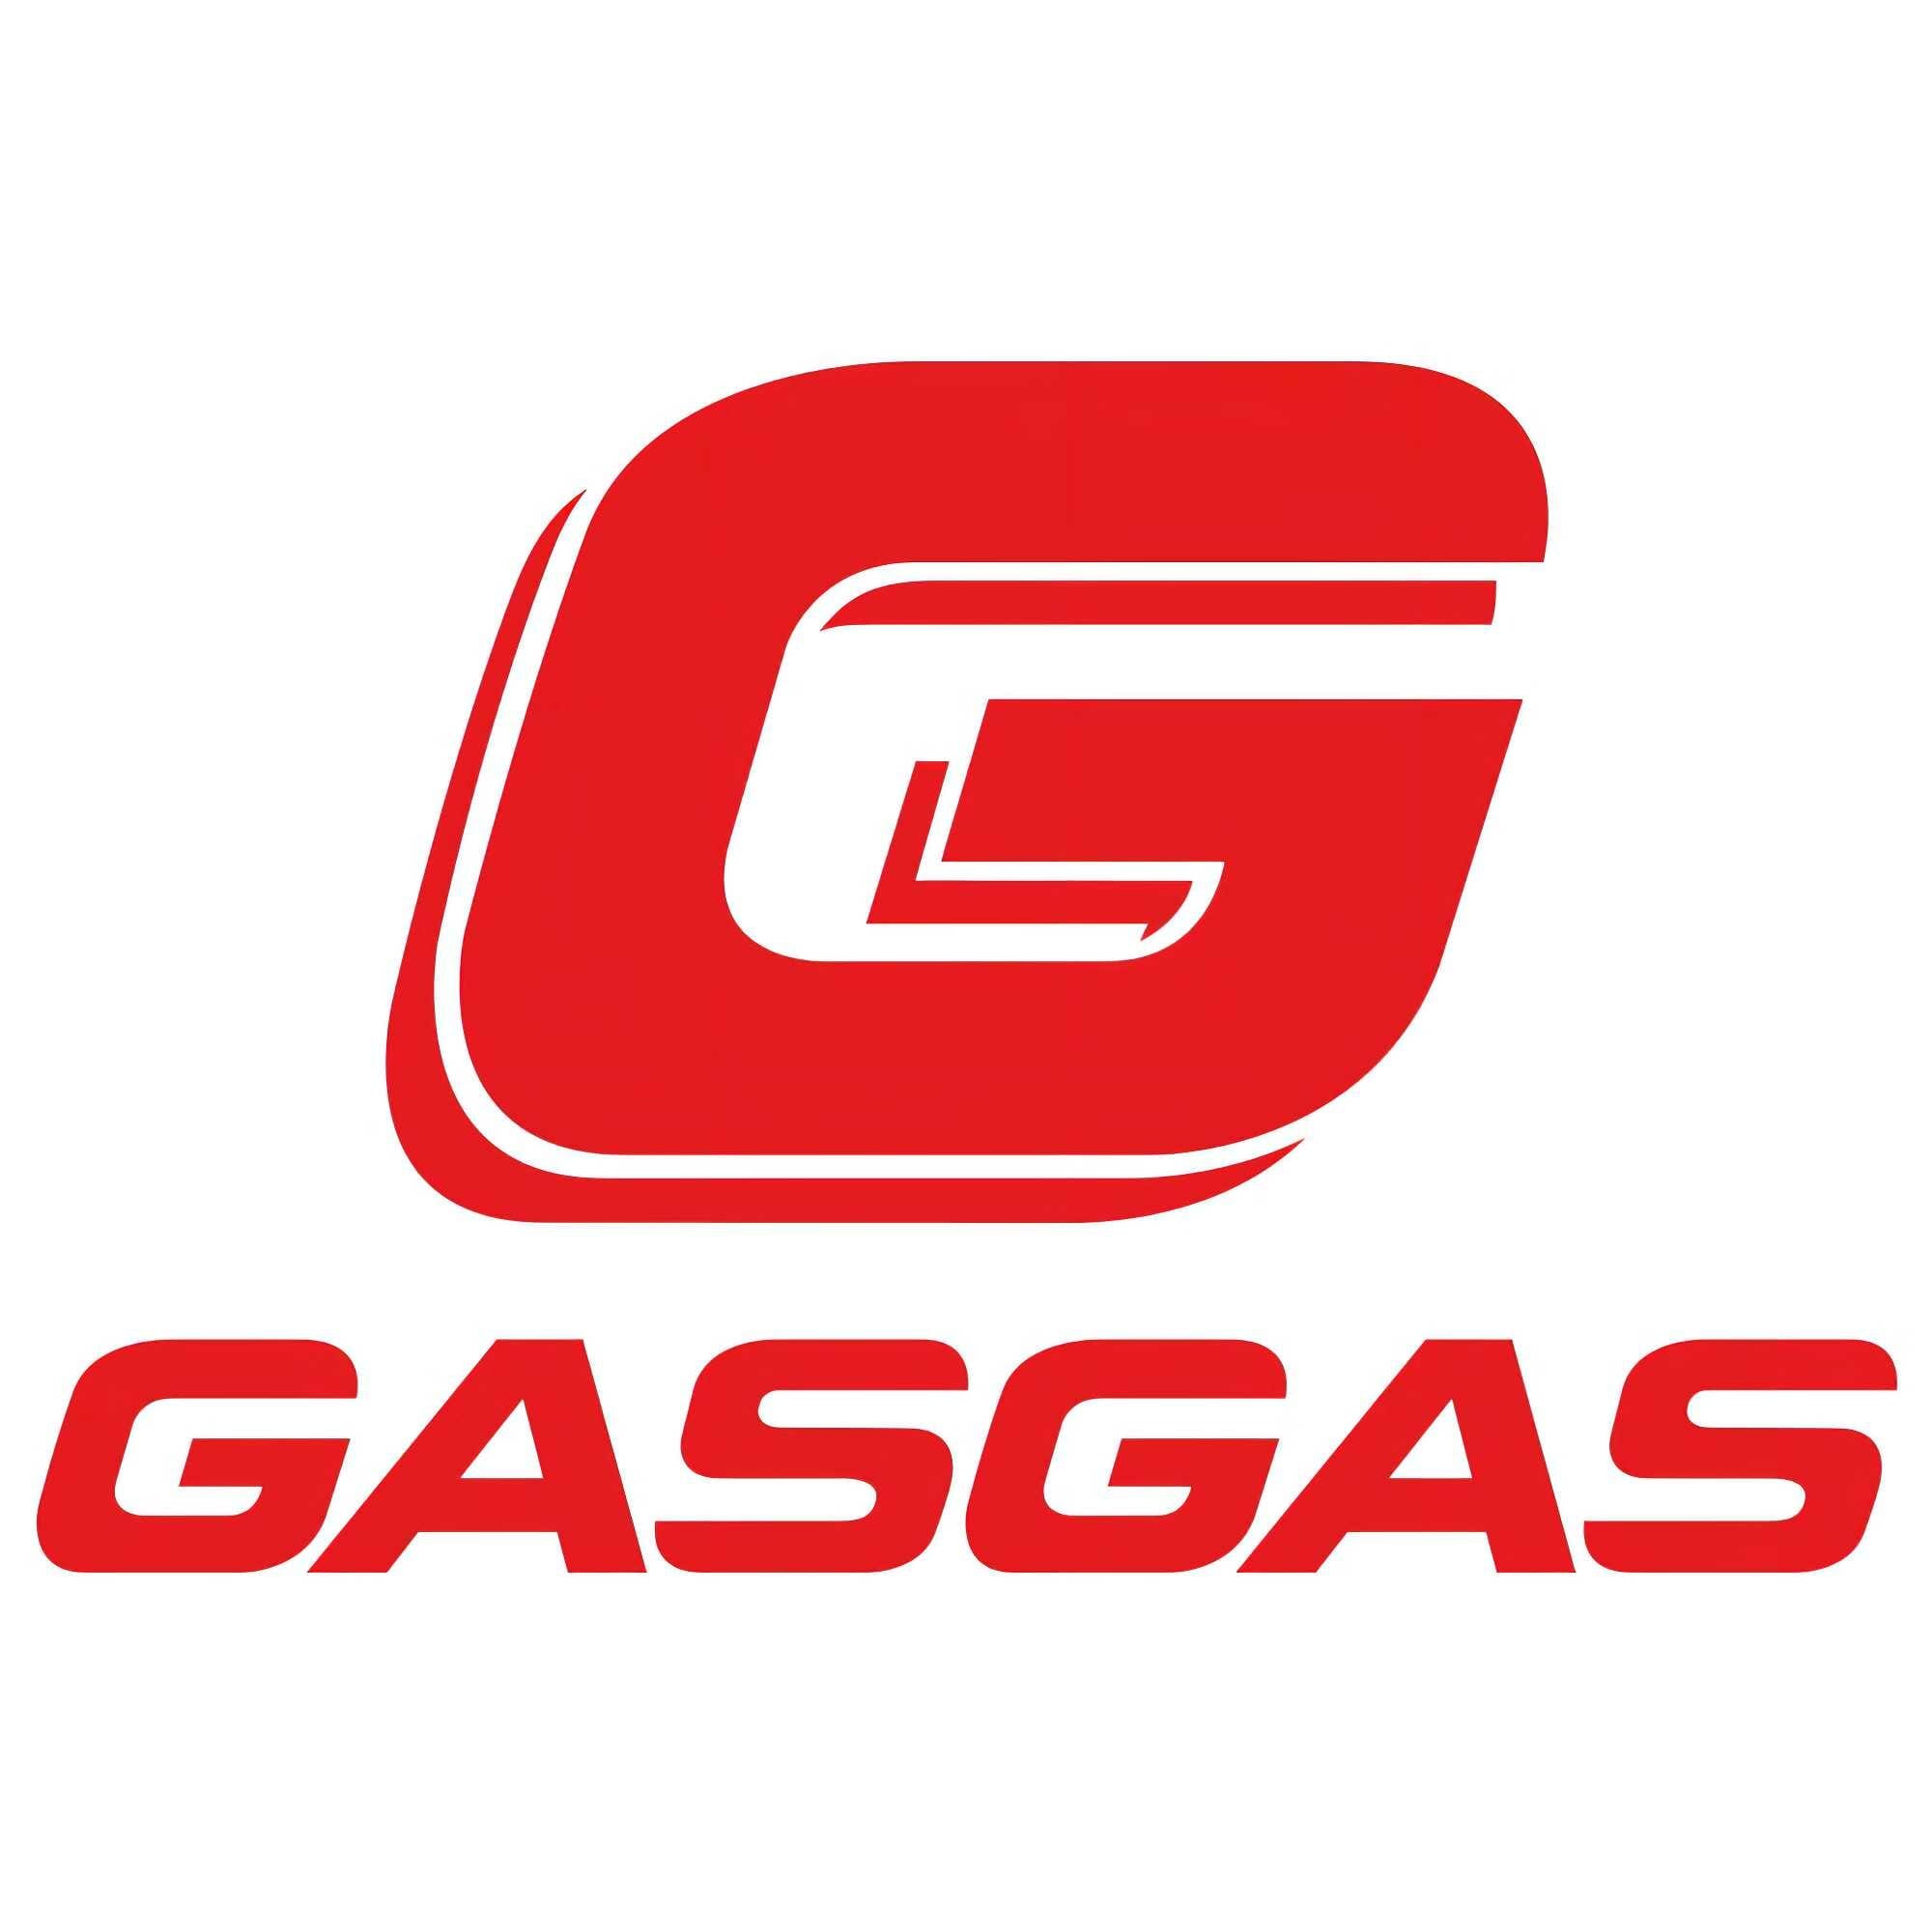 GasGas - 700cc Supermoto and Enduro Coming
- also in the MOTORCYCLES.NEWS APP